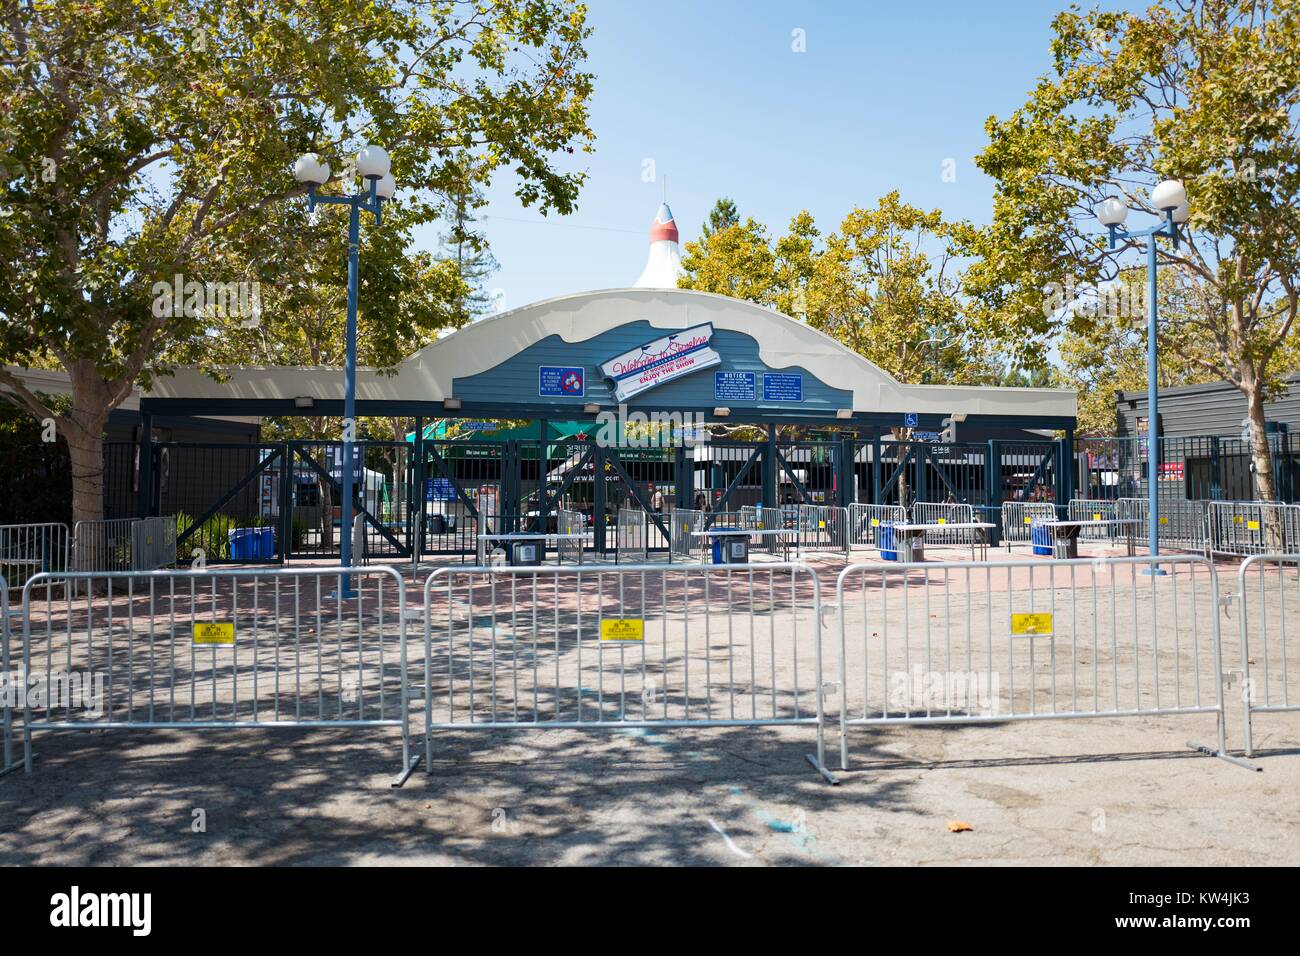 Entry gates at the Shoreline Amphitheatre, a popular concert venue in the Silicon Valley town of Mountain View, California, August 24, 2016. Stock Photo